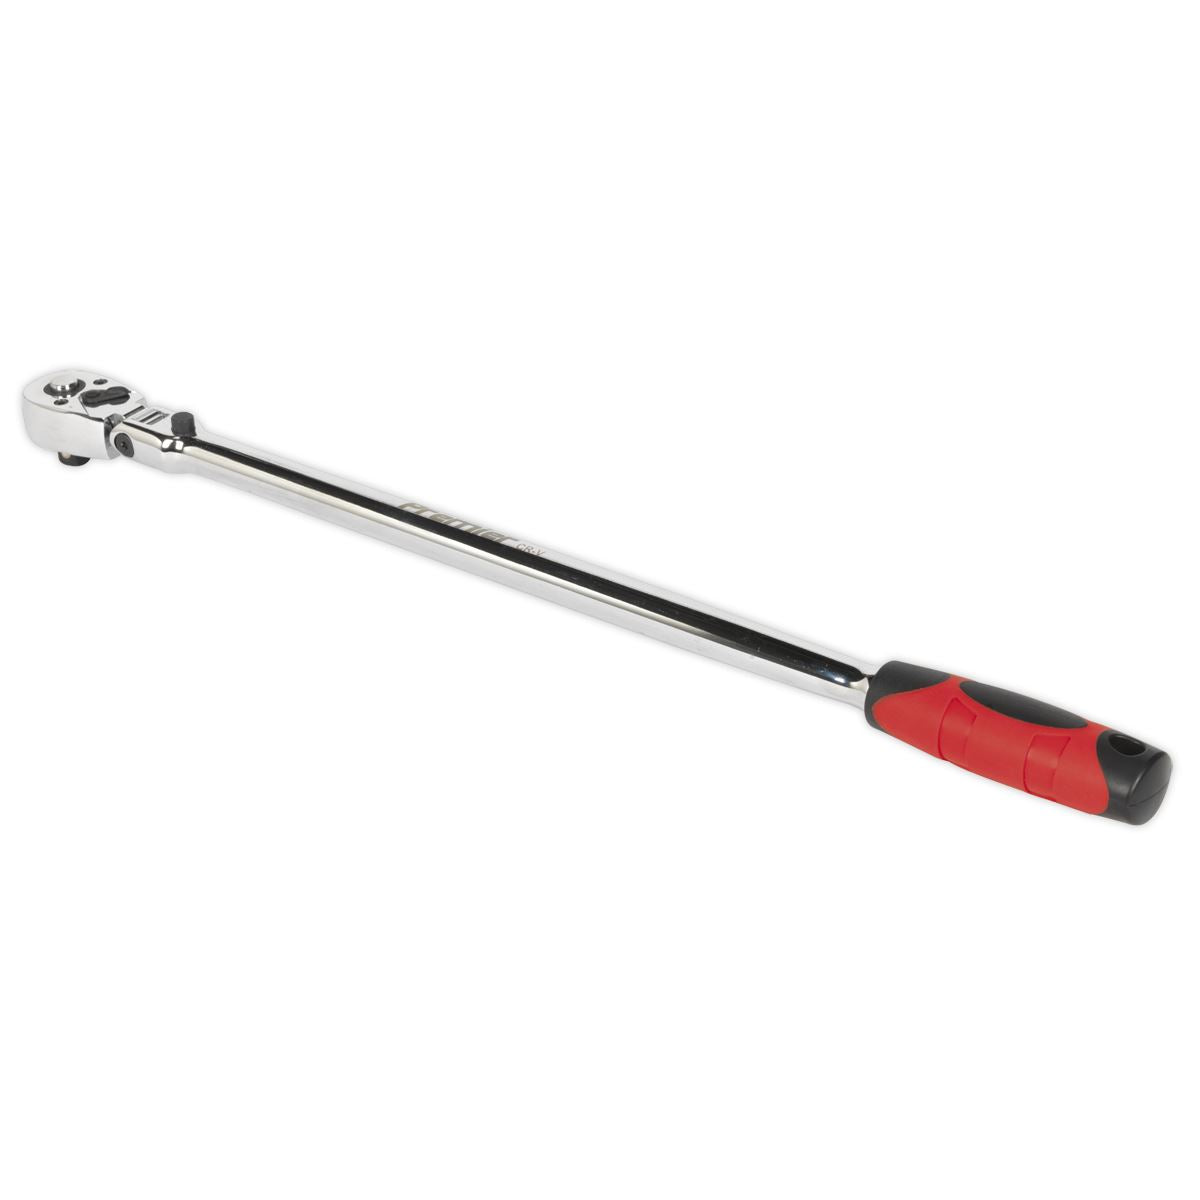 Sealey Ratchet Wrench Flexi-Head Extra-Long 455mm 3/8"Sq Drive Premier